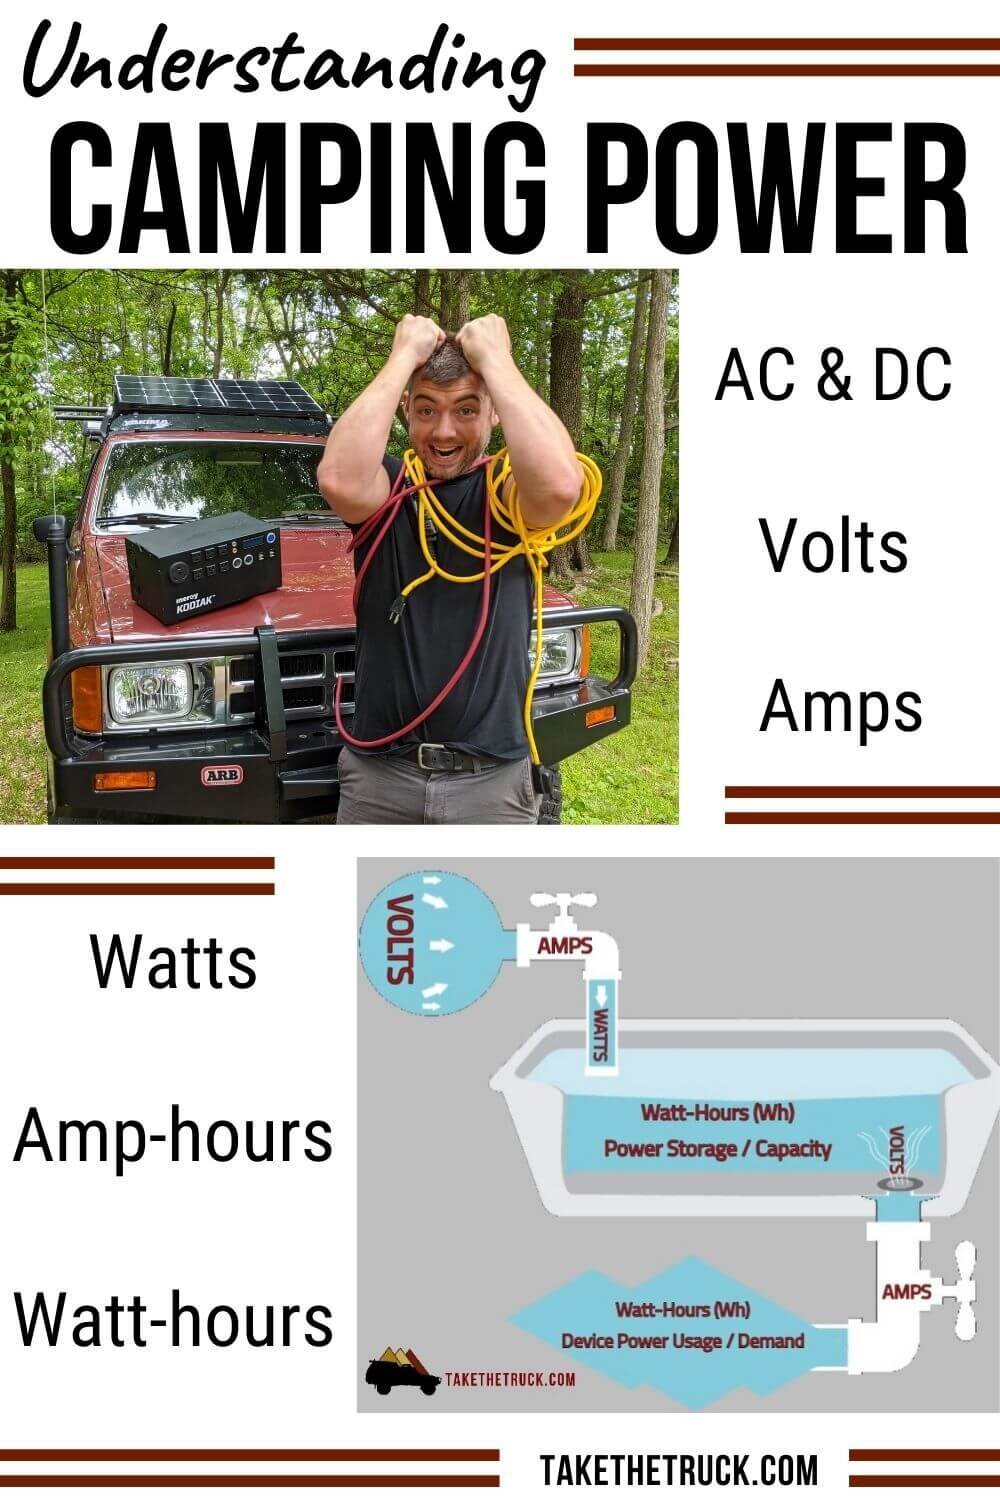 Camping power and electrical terms made easy to understand and apply to your van build, truck bed camper, or other camper (amps, watts, amp hours, watt hours, volts, AC and DC power).